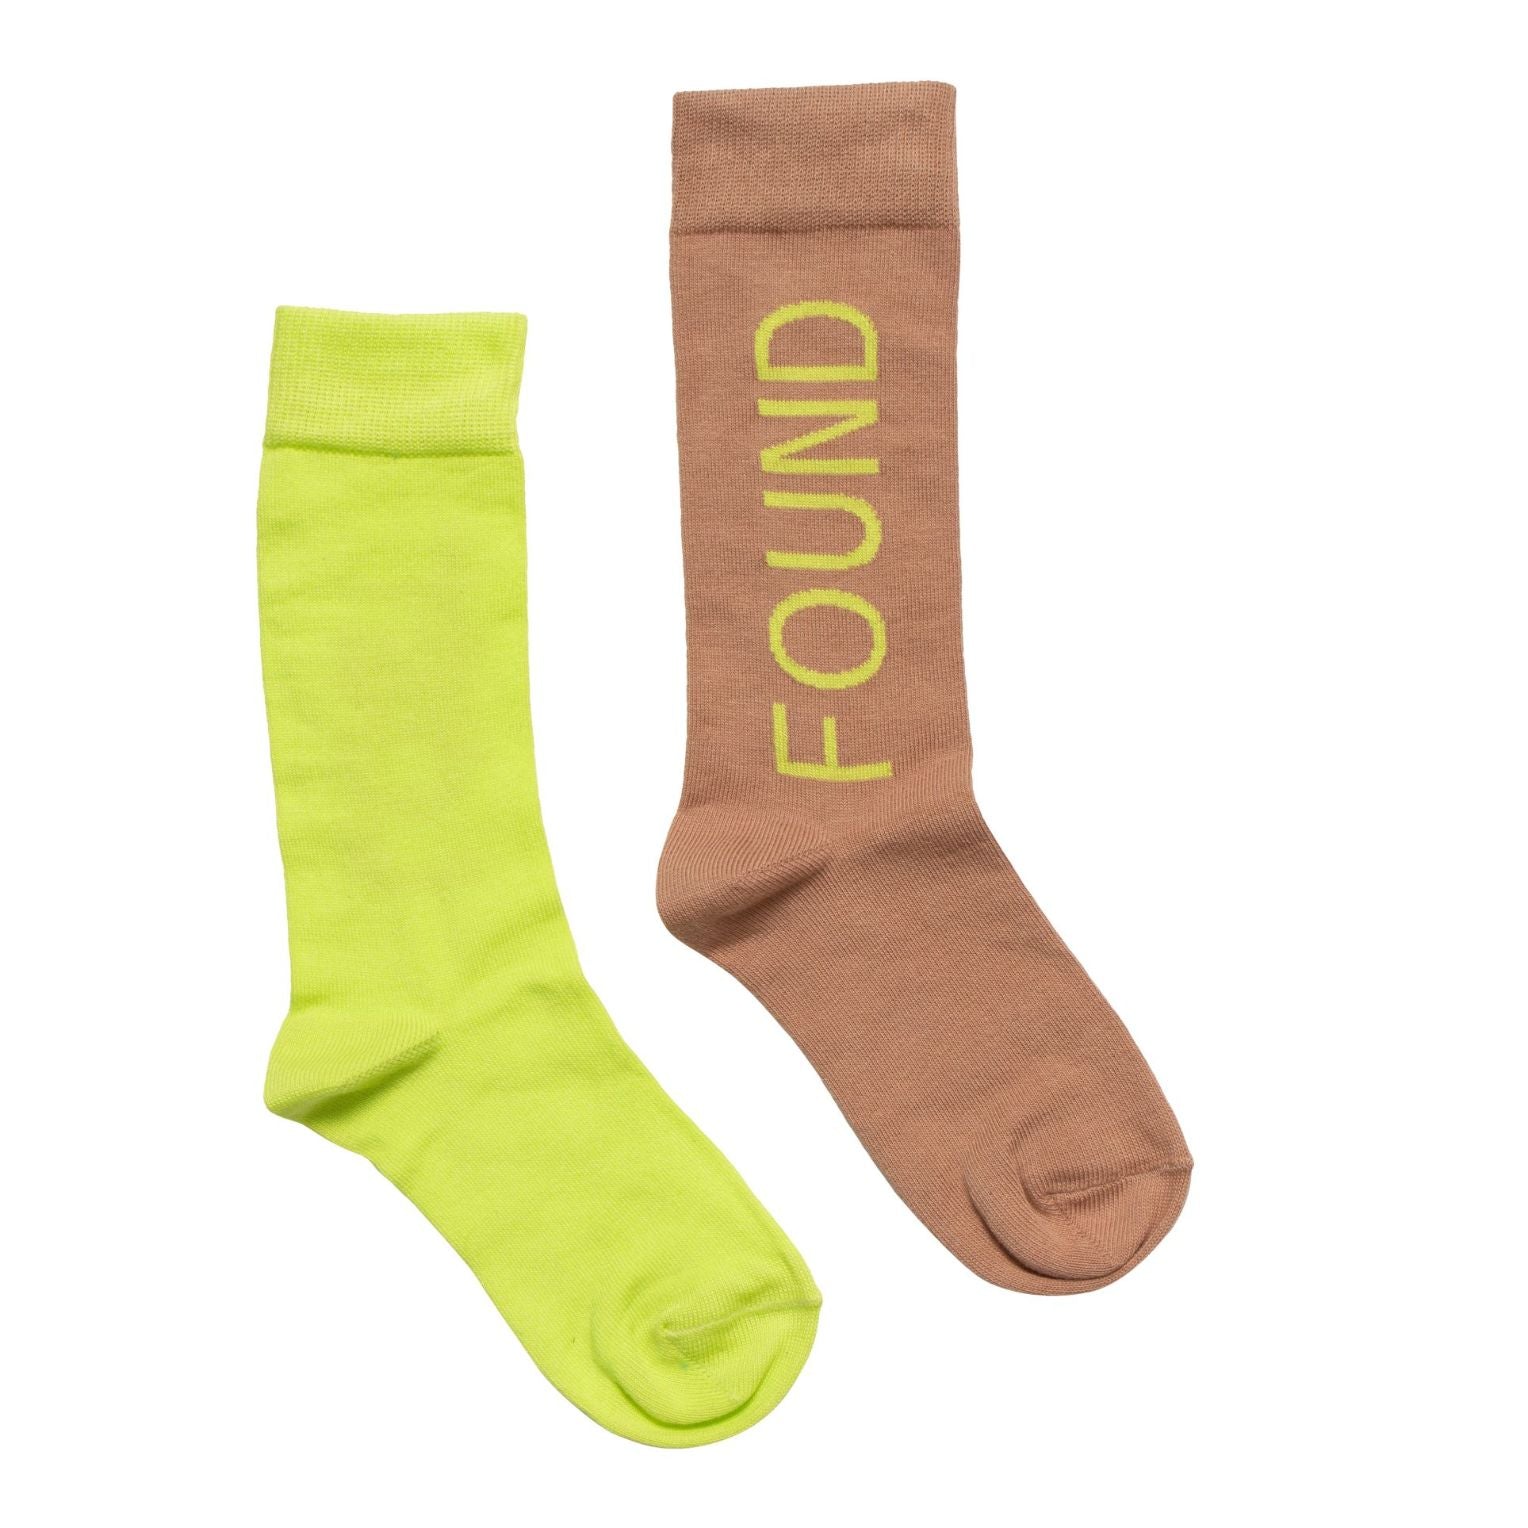 Lost Found Sock- Dull Pink / Acid